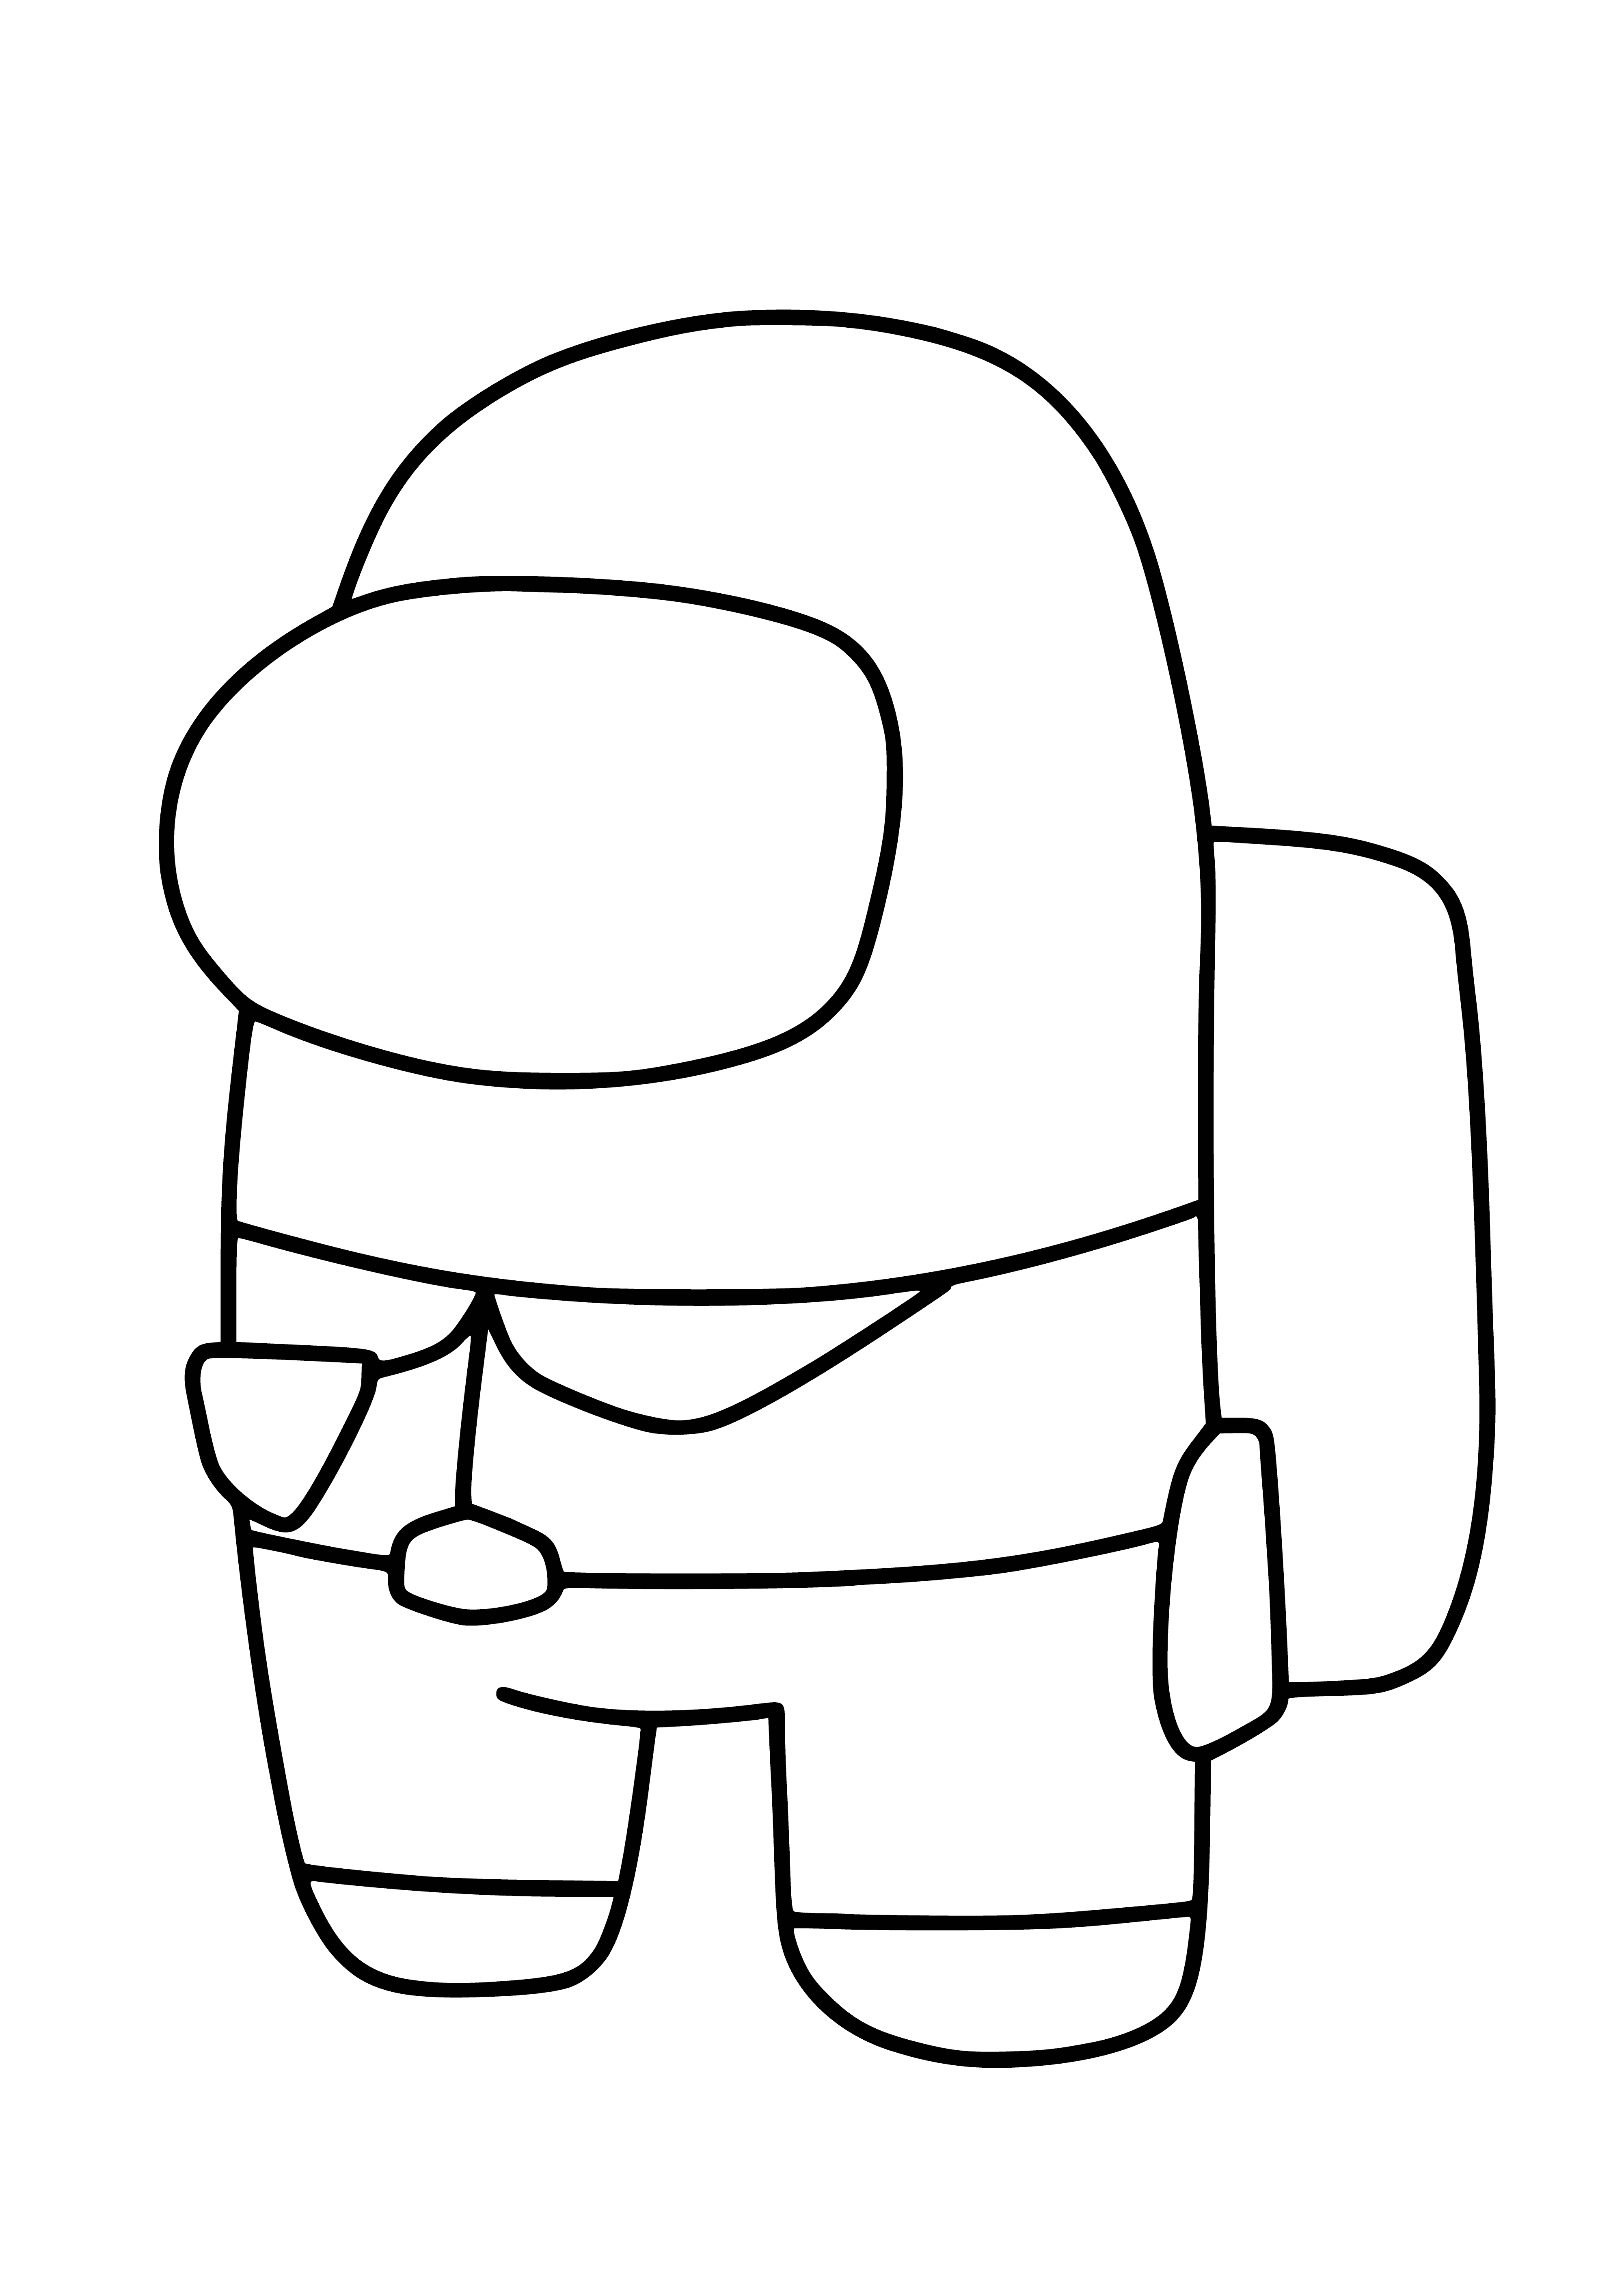 coloring page: Central character in red suit with white stripes, 4 others in gray suits in circle around it on white surface. All with rectangular heads and 2 black eyes.